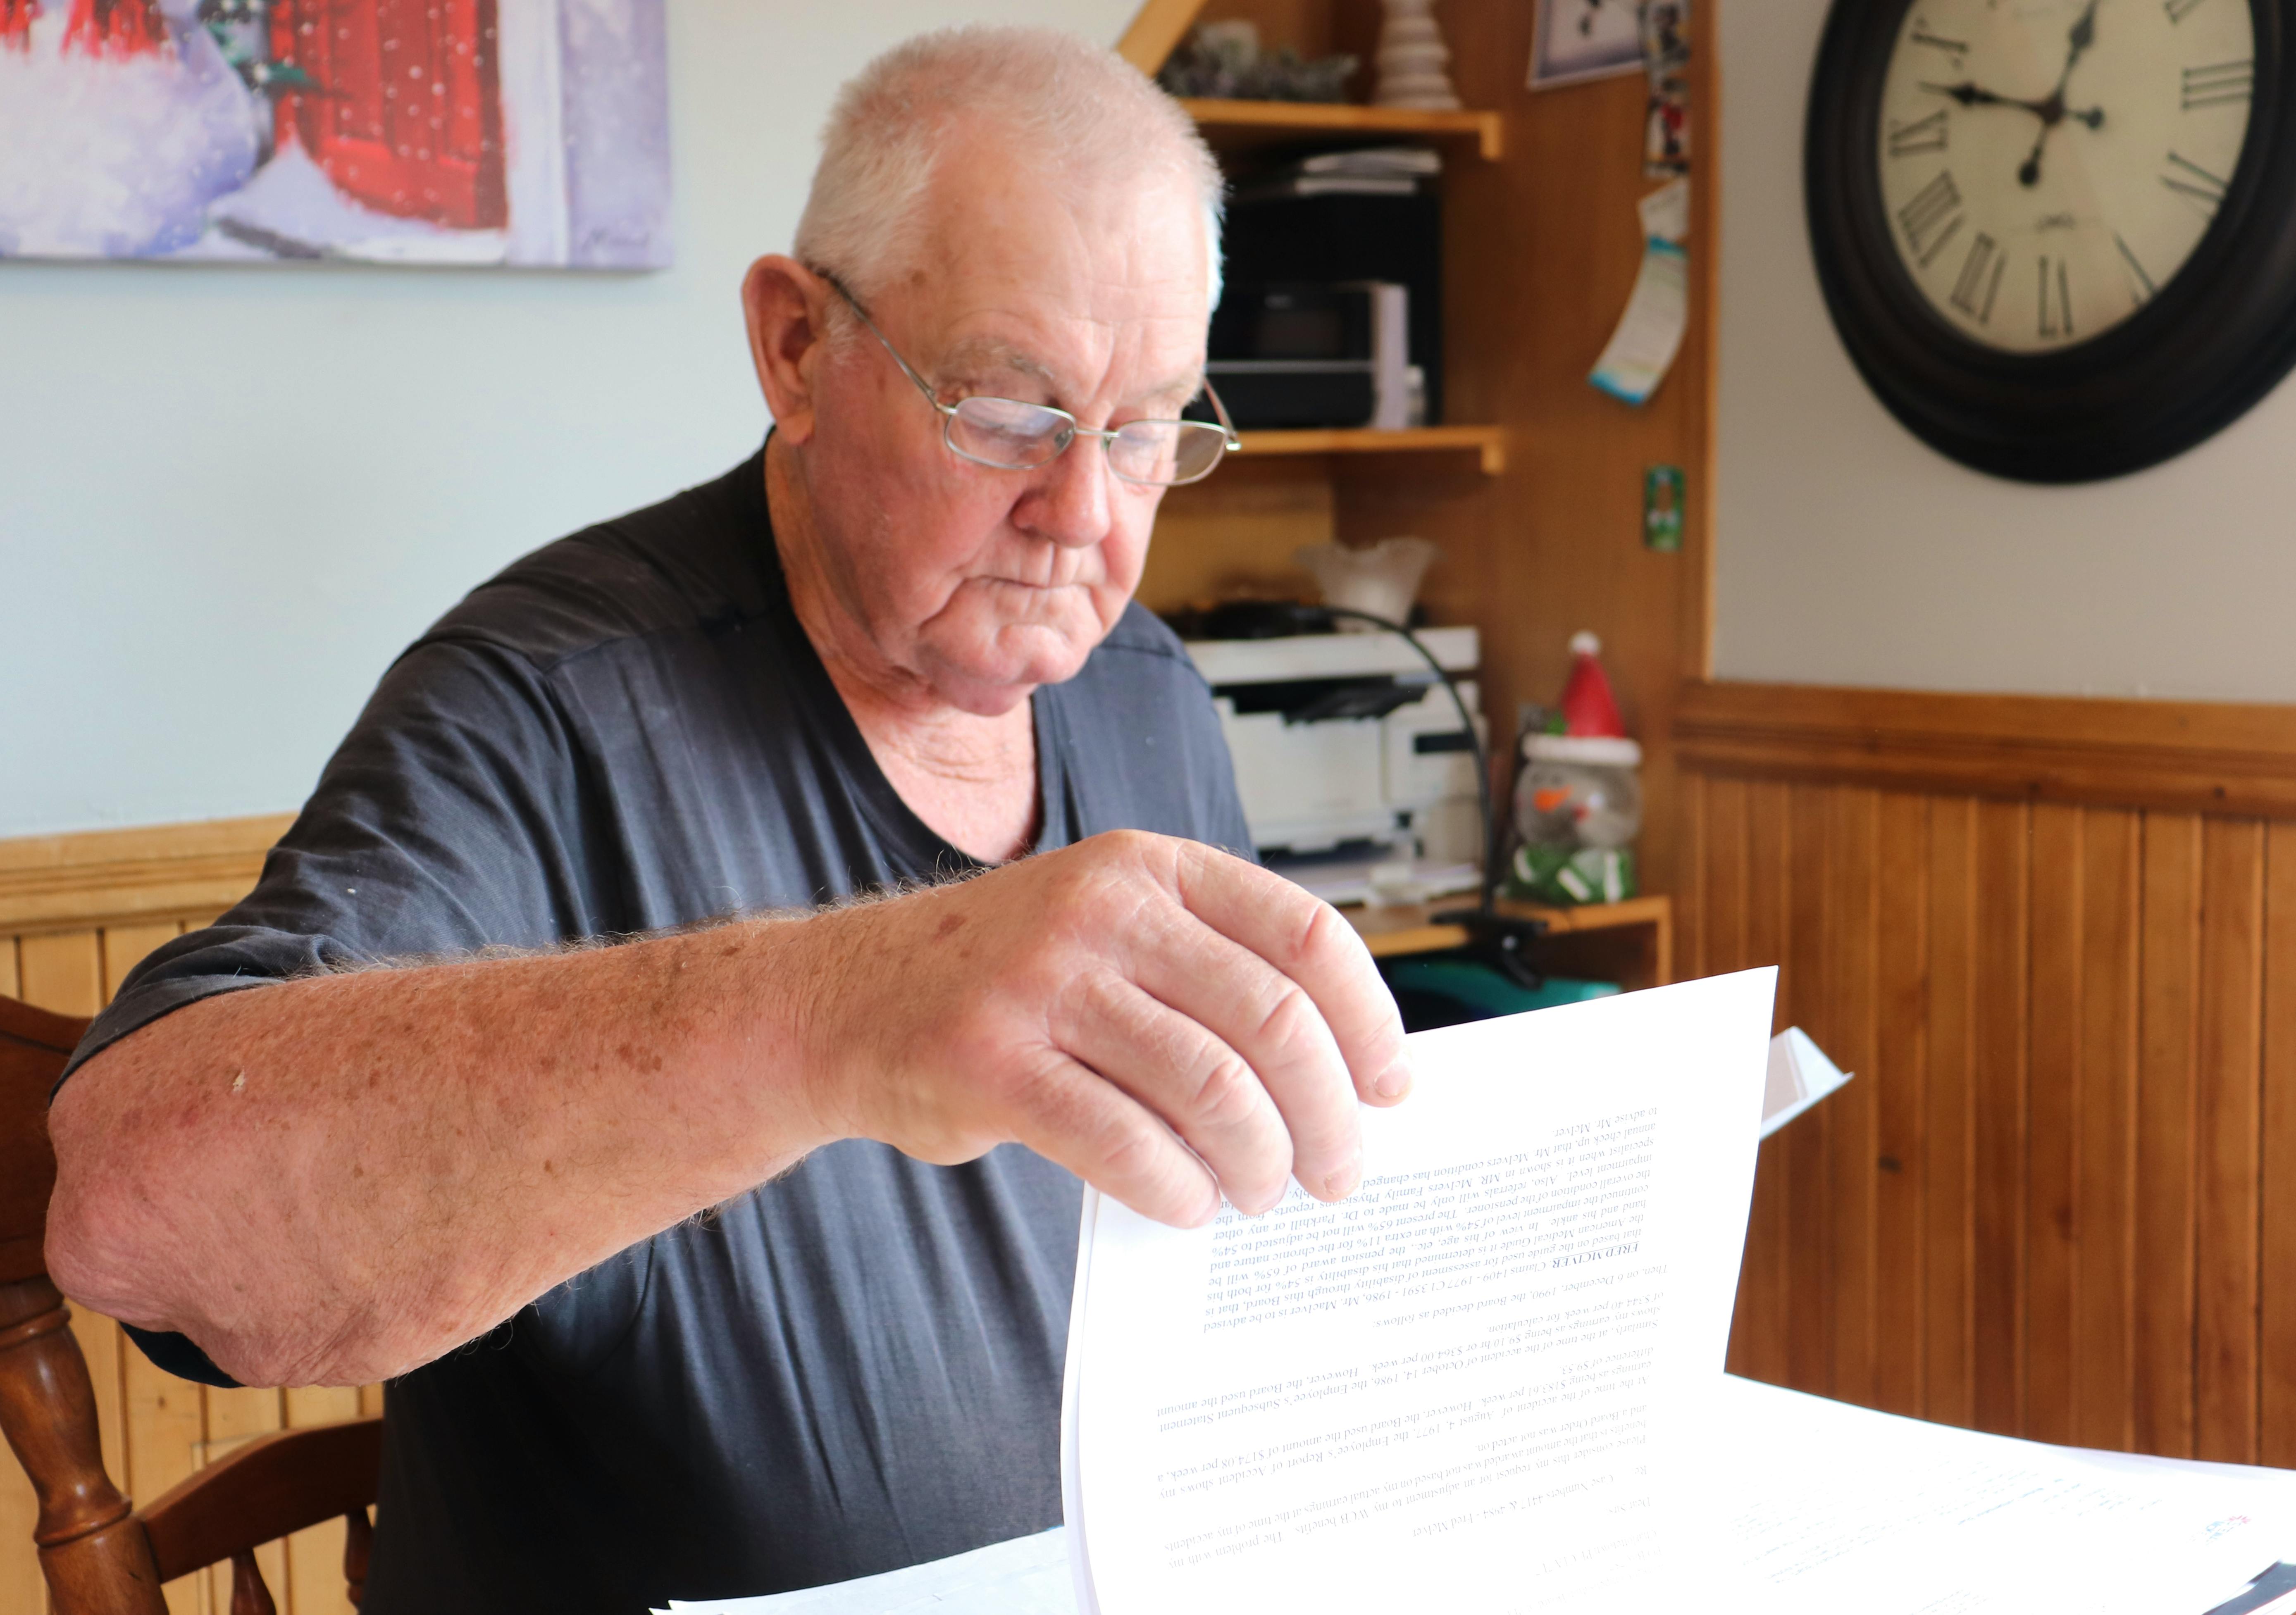 Fred McIver, who was injured on the job in 1977, will finish paying nearly $12,000 in legal fees to the Workers Compensation Board in December 2022. McIver has maintained for years the WCB assigned him the wrong kind of benefits. 